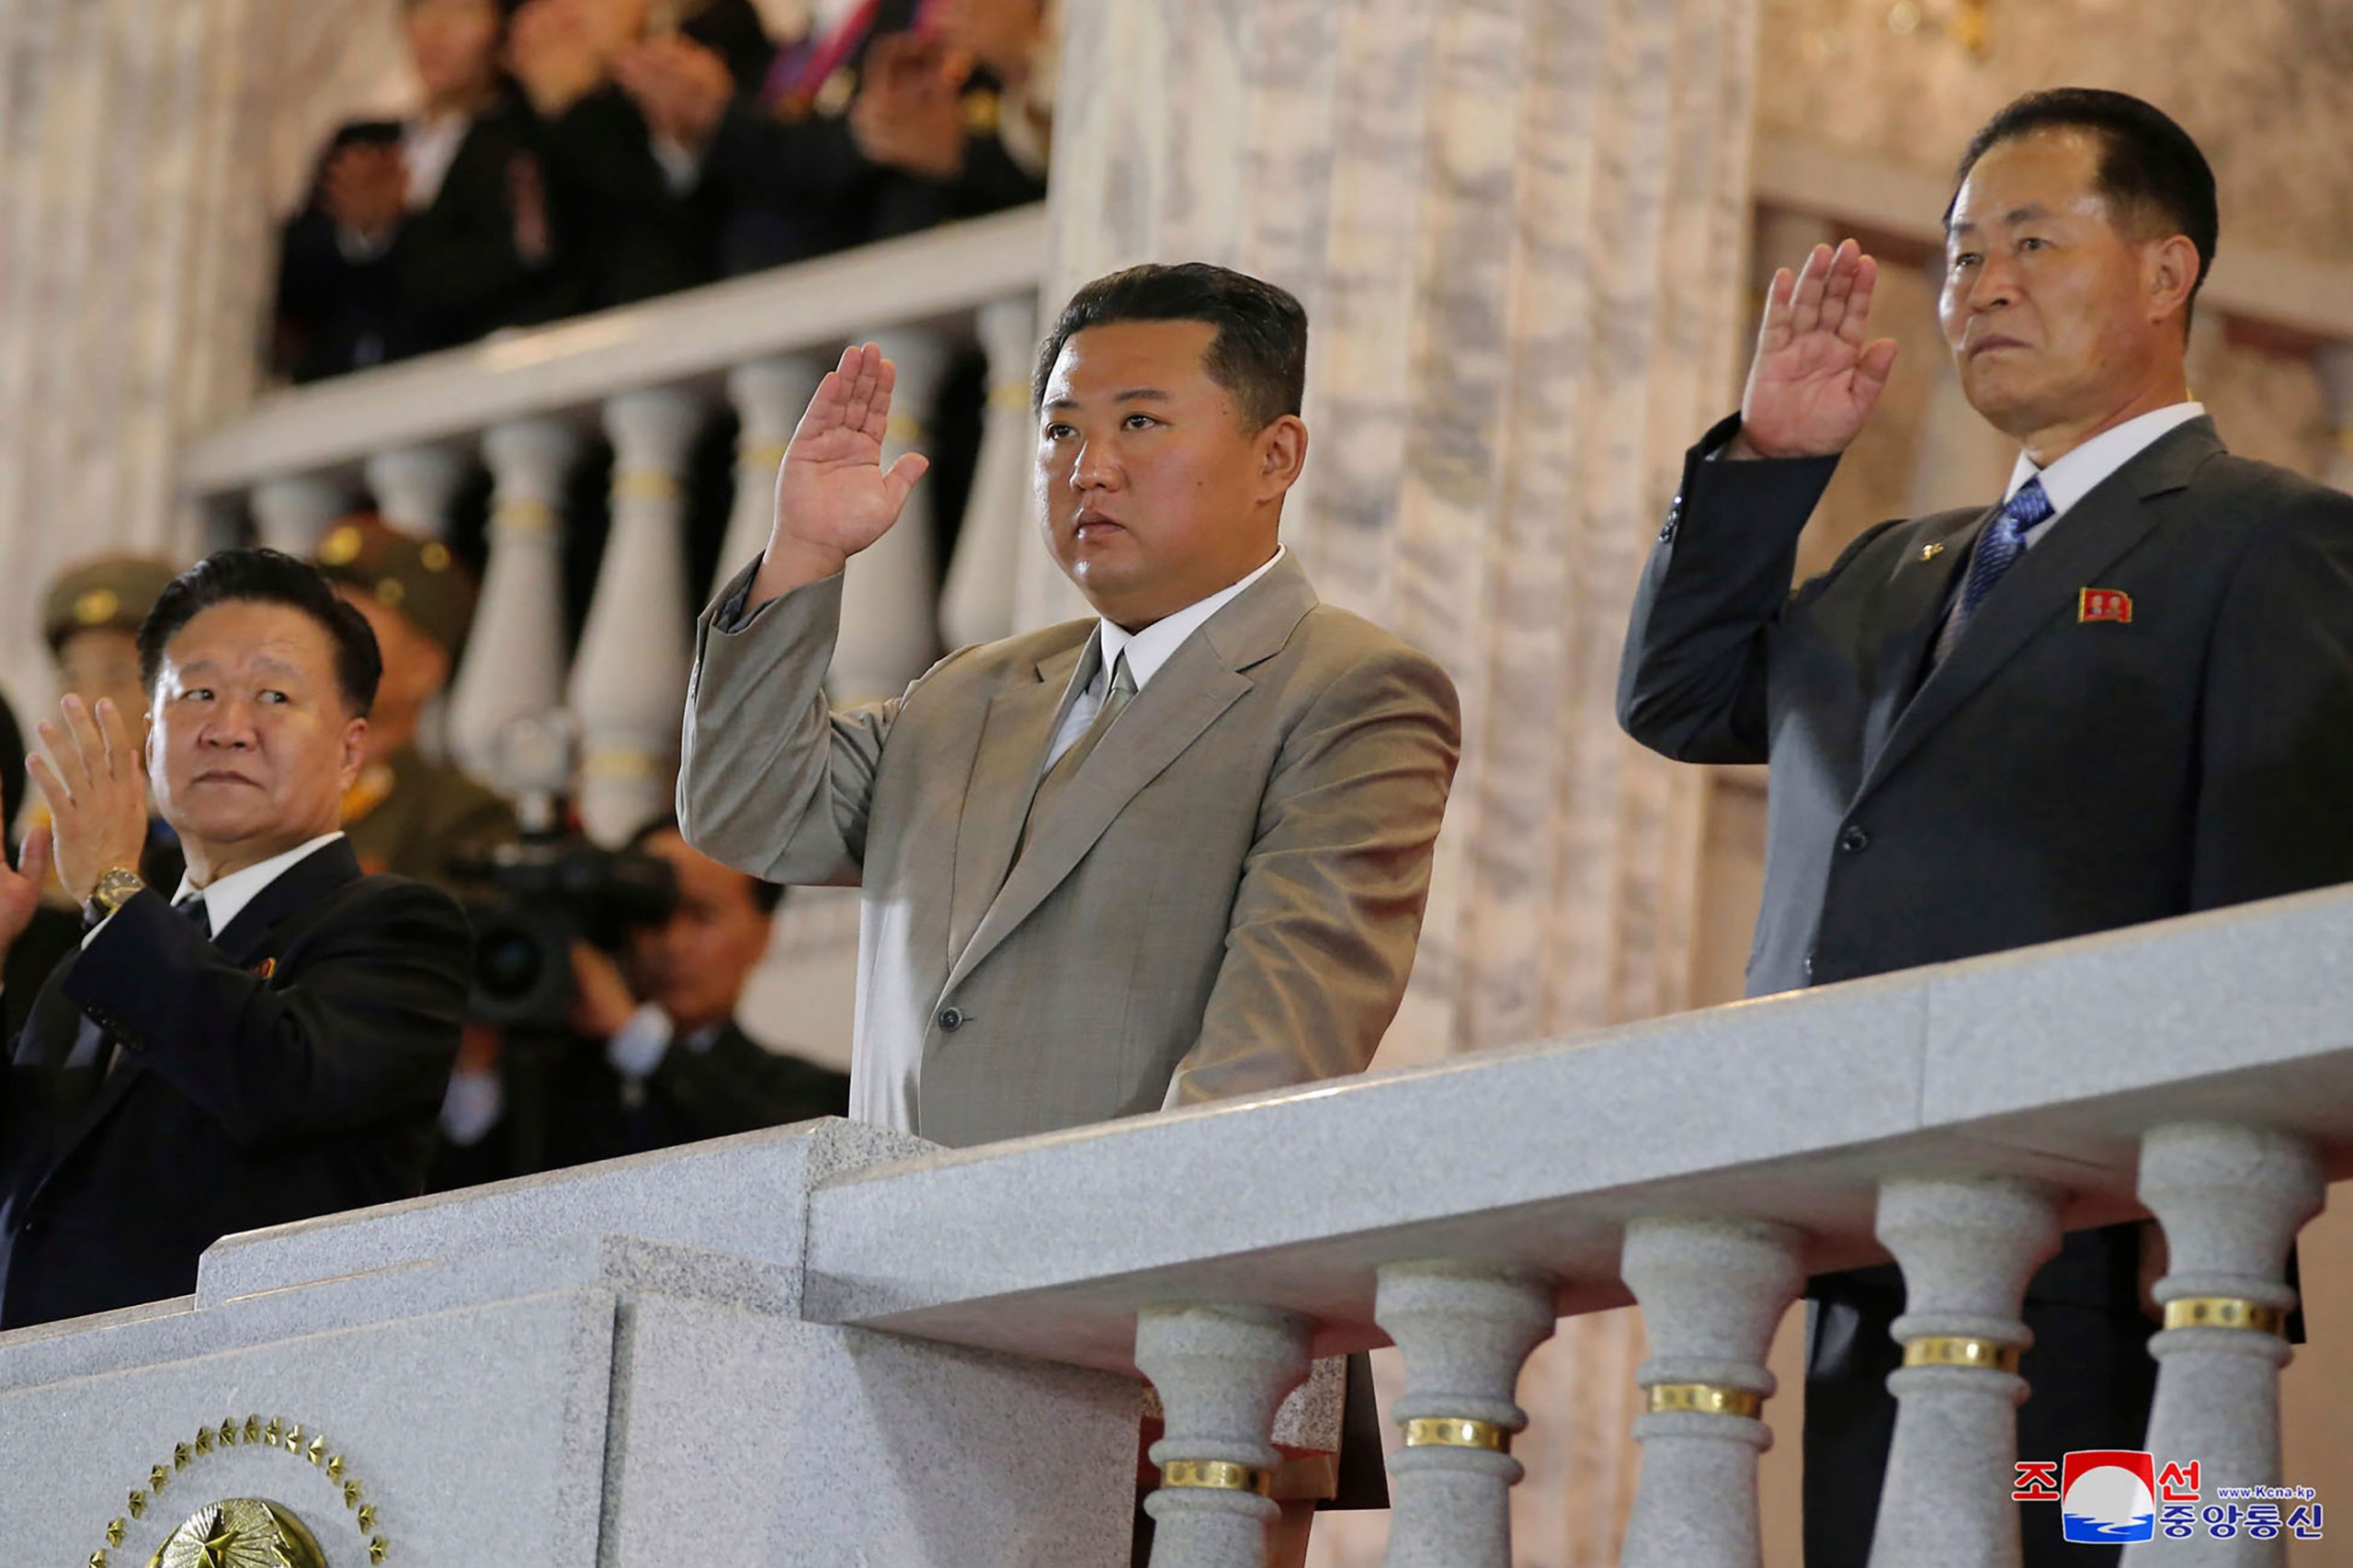 North Korea’s Kim Jong Un’s weight loss takes limelight in military parade